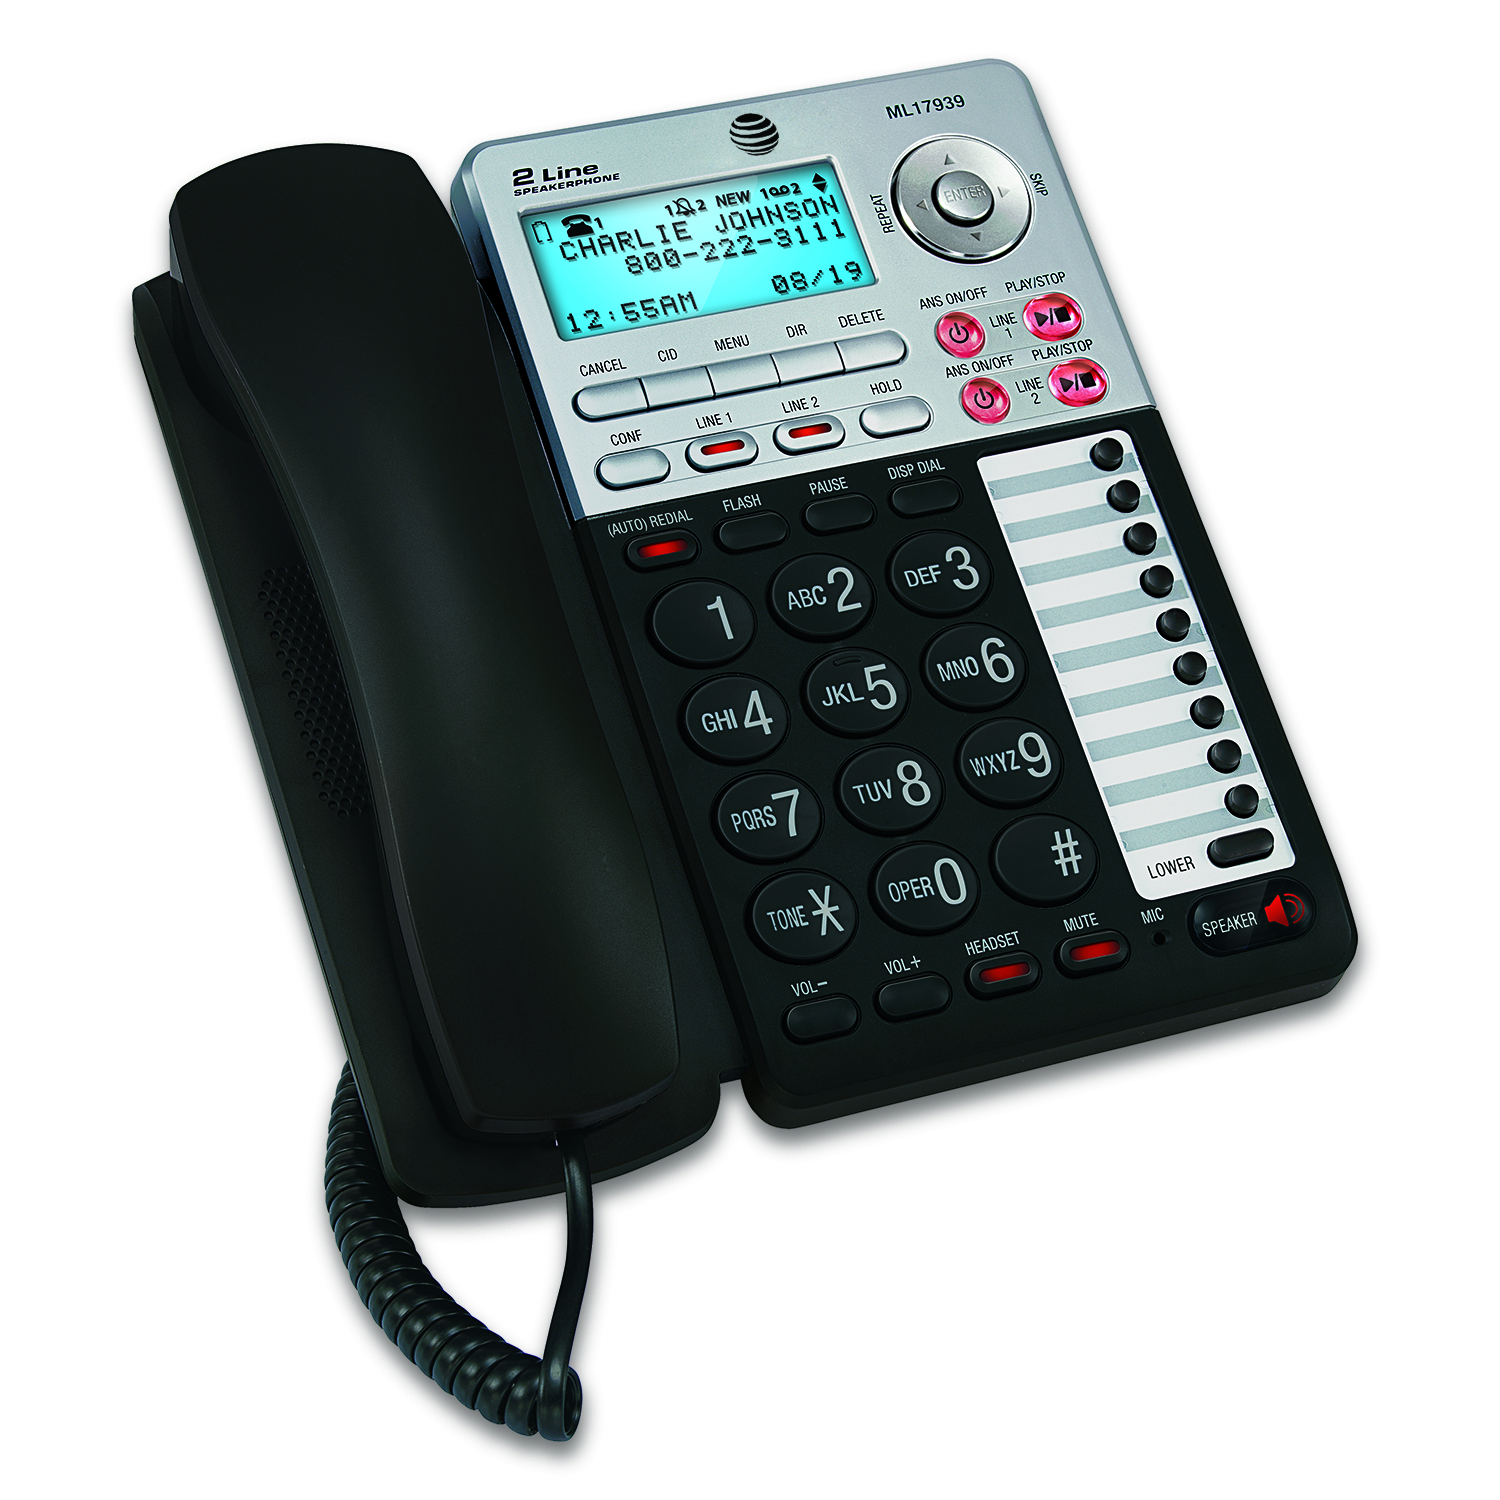 AT&T ML17939 2-Line Speakerphone with Caller ID and Digital Answering System - image 3 of 5